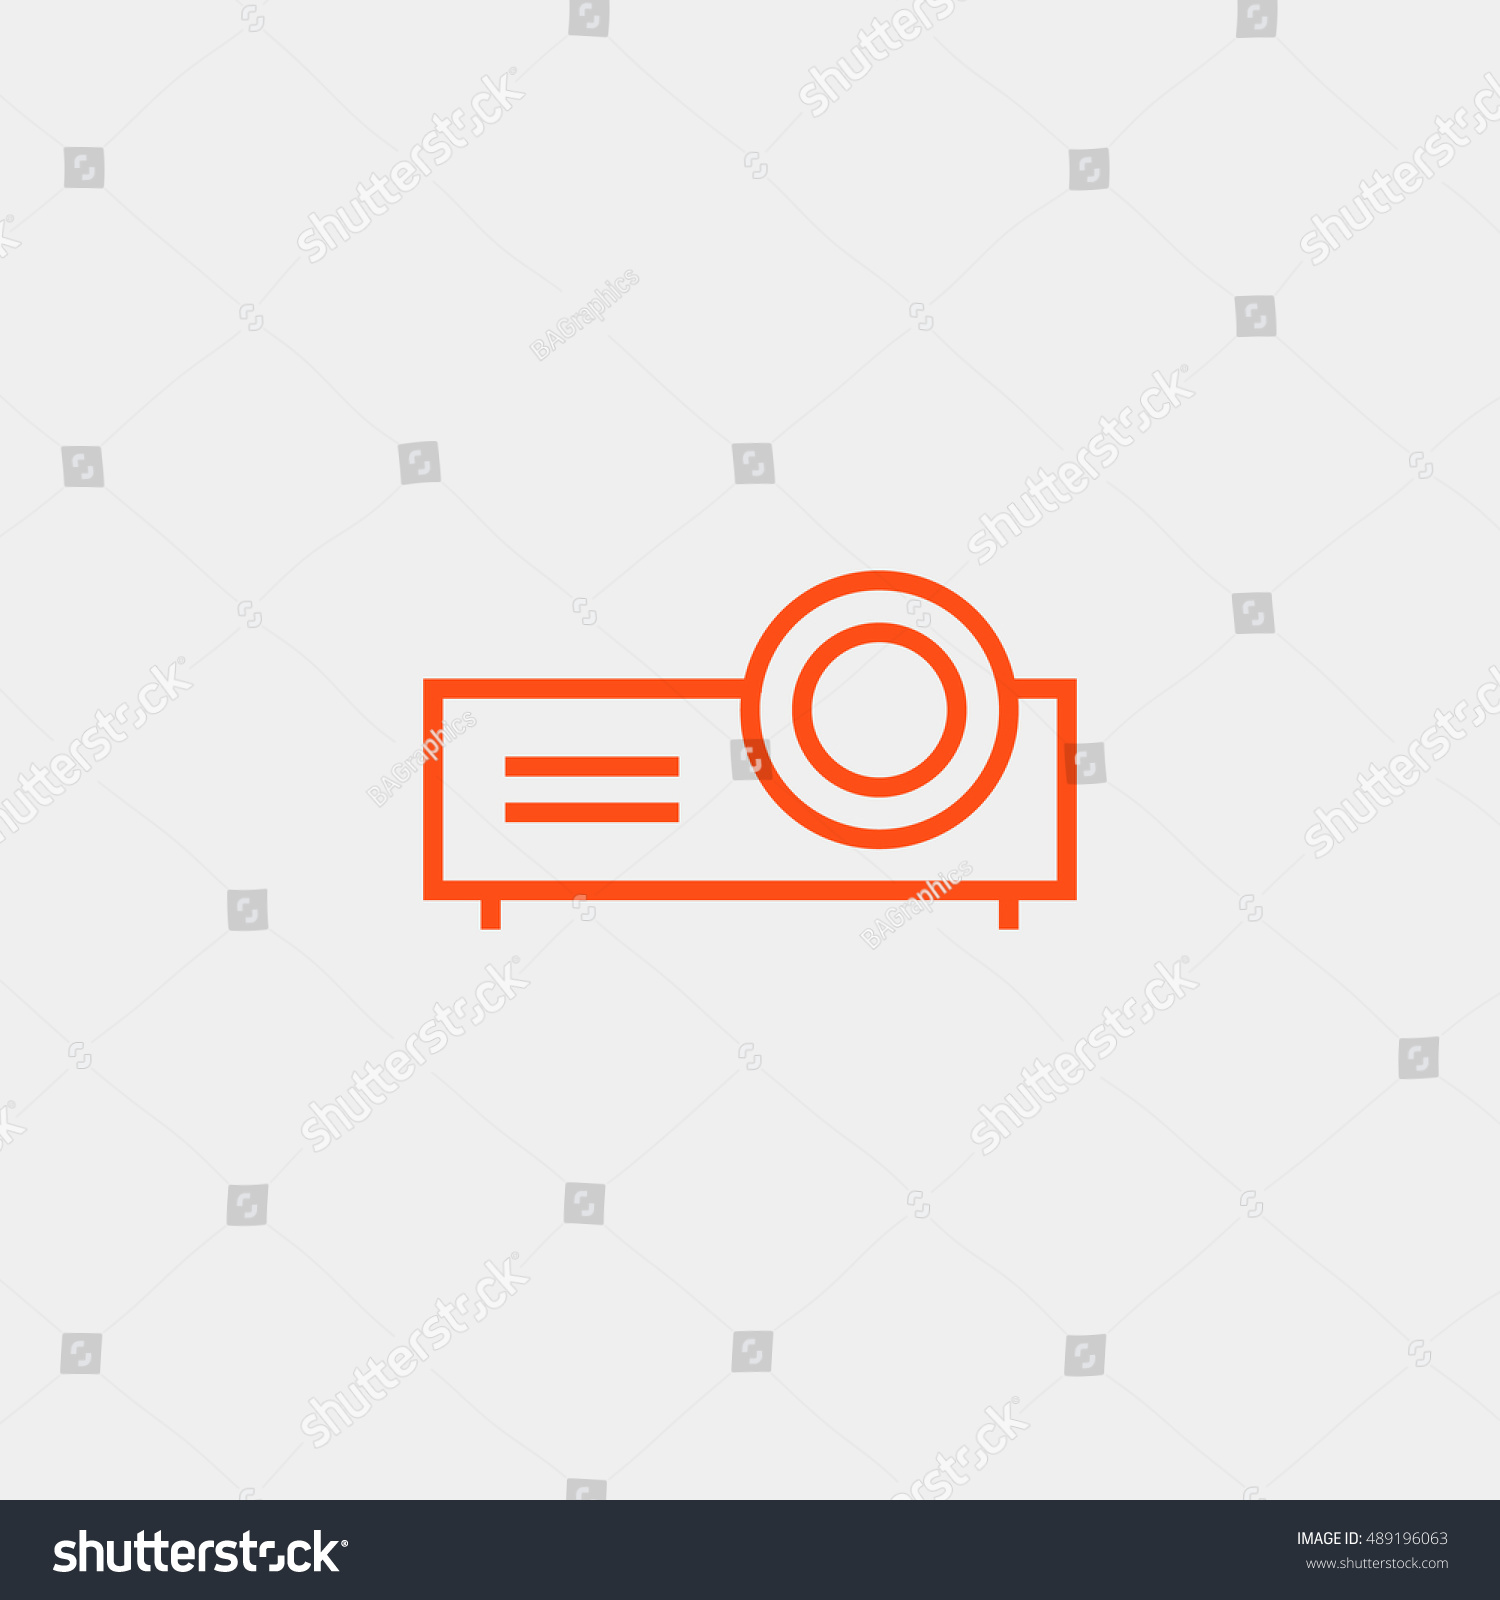 SVG of Projector icon vector, clip art. Also useful as logo, web element, symbol, graphic image, silhouette and illustration. Compatible with ai, cdr, jpg, png, svg, pdf, ico and eps formats. svg